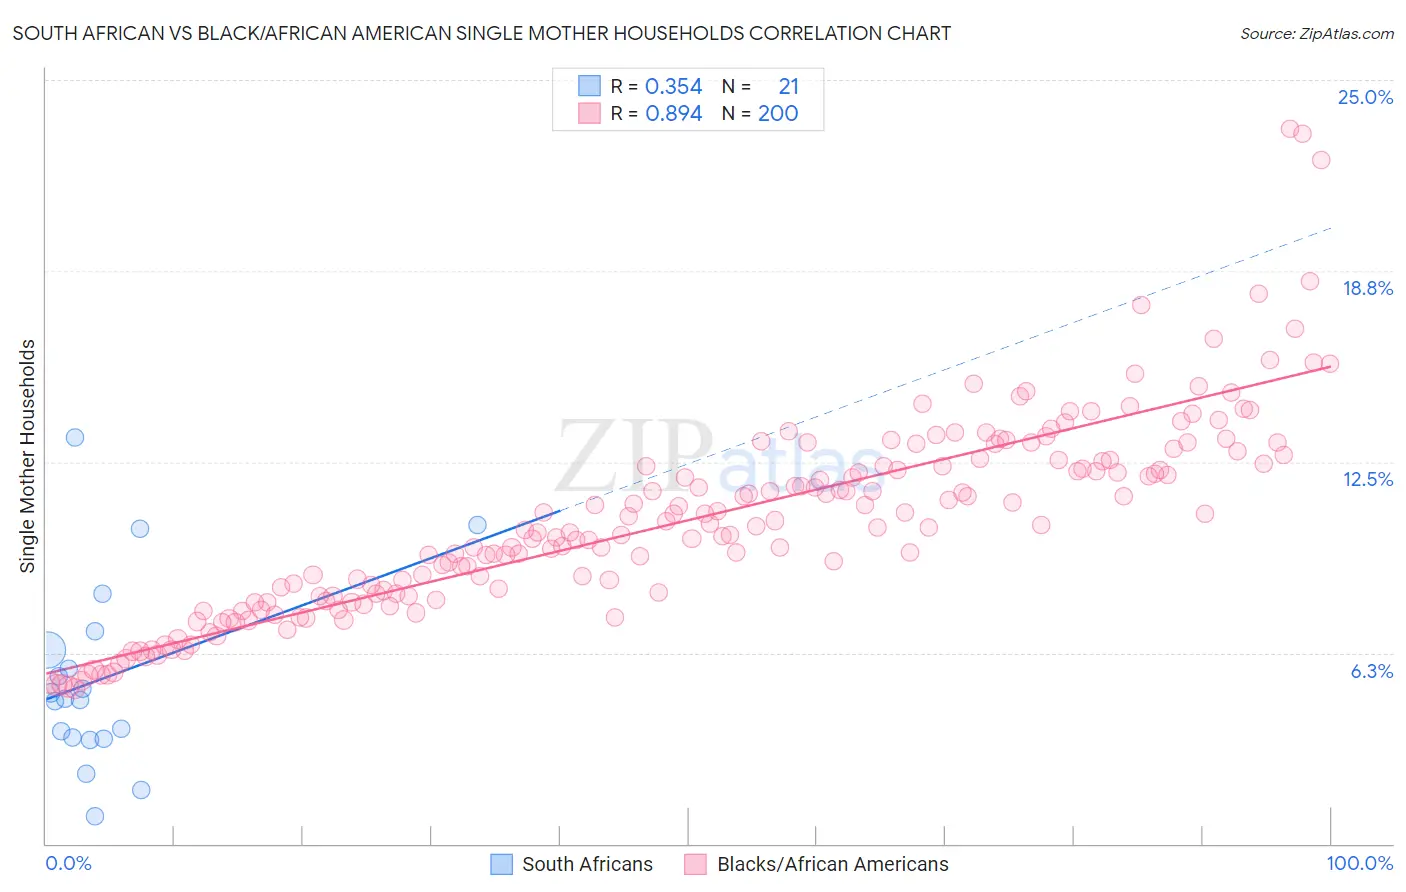 South African vs Black/African American Single Mother Households